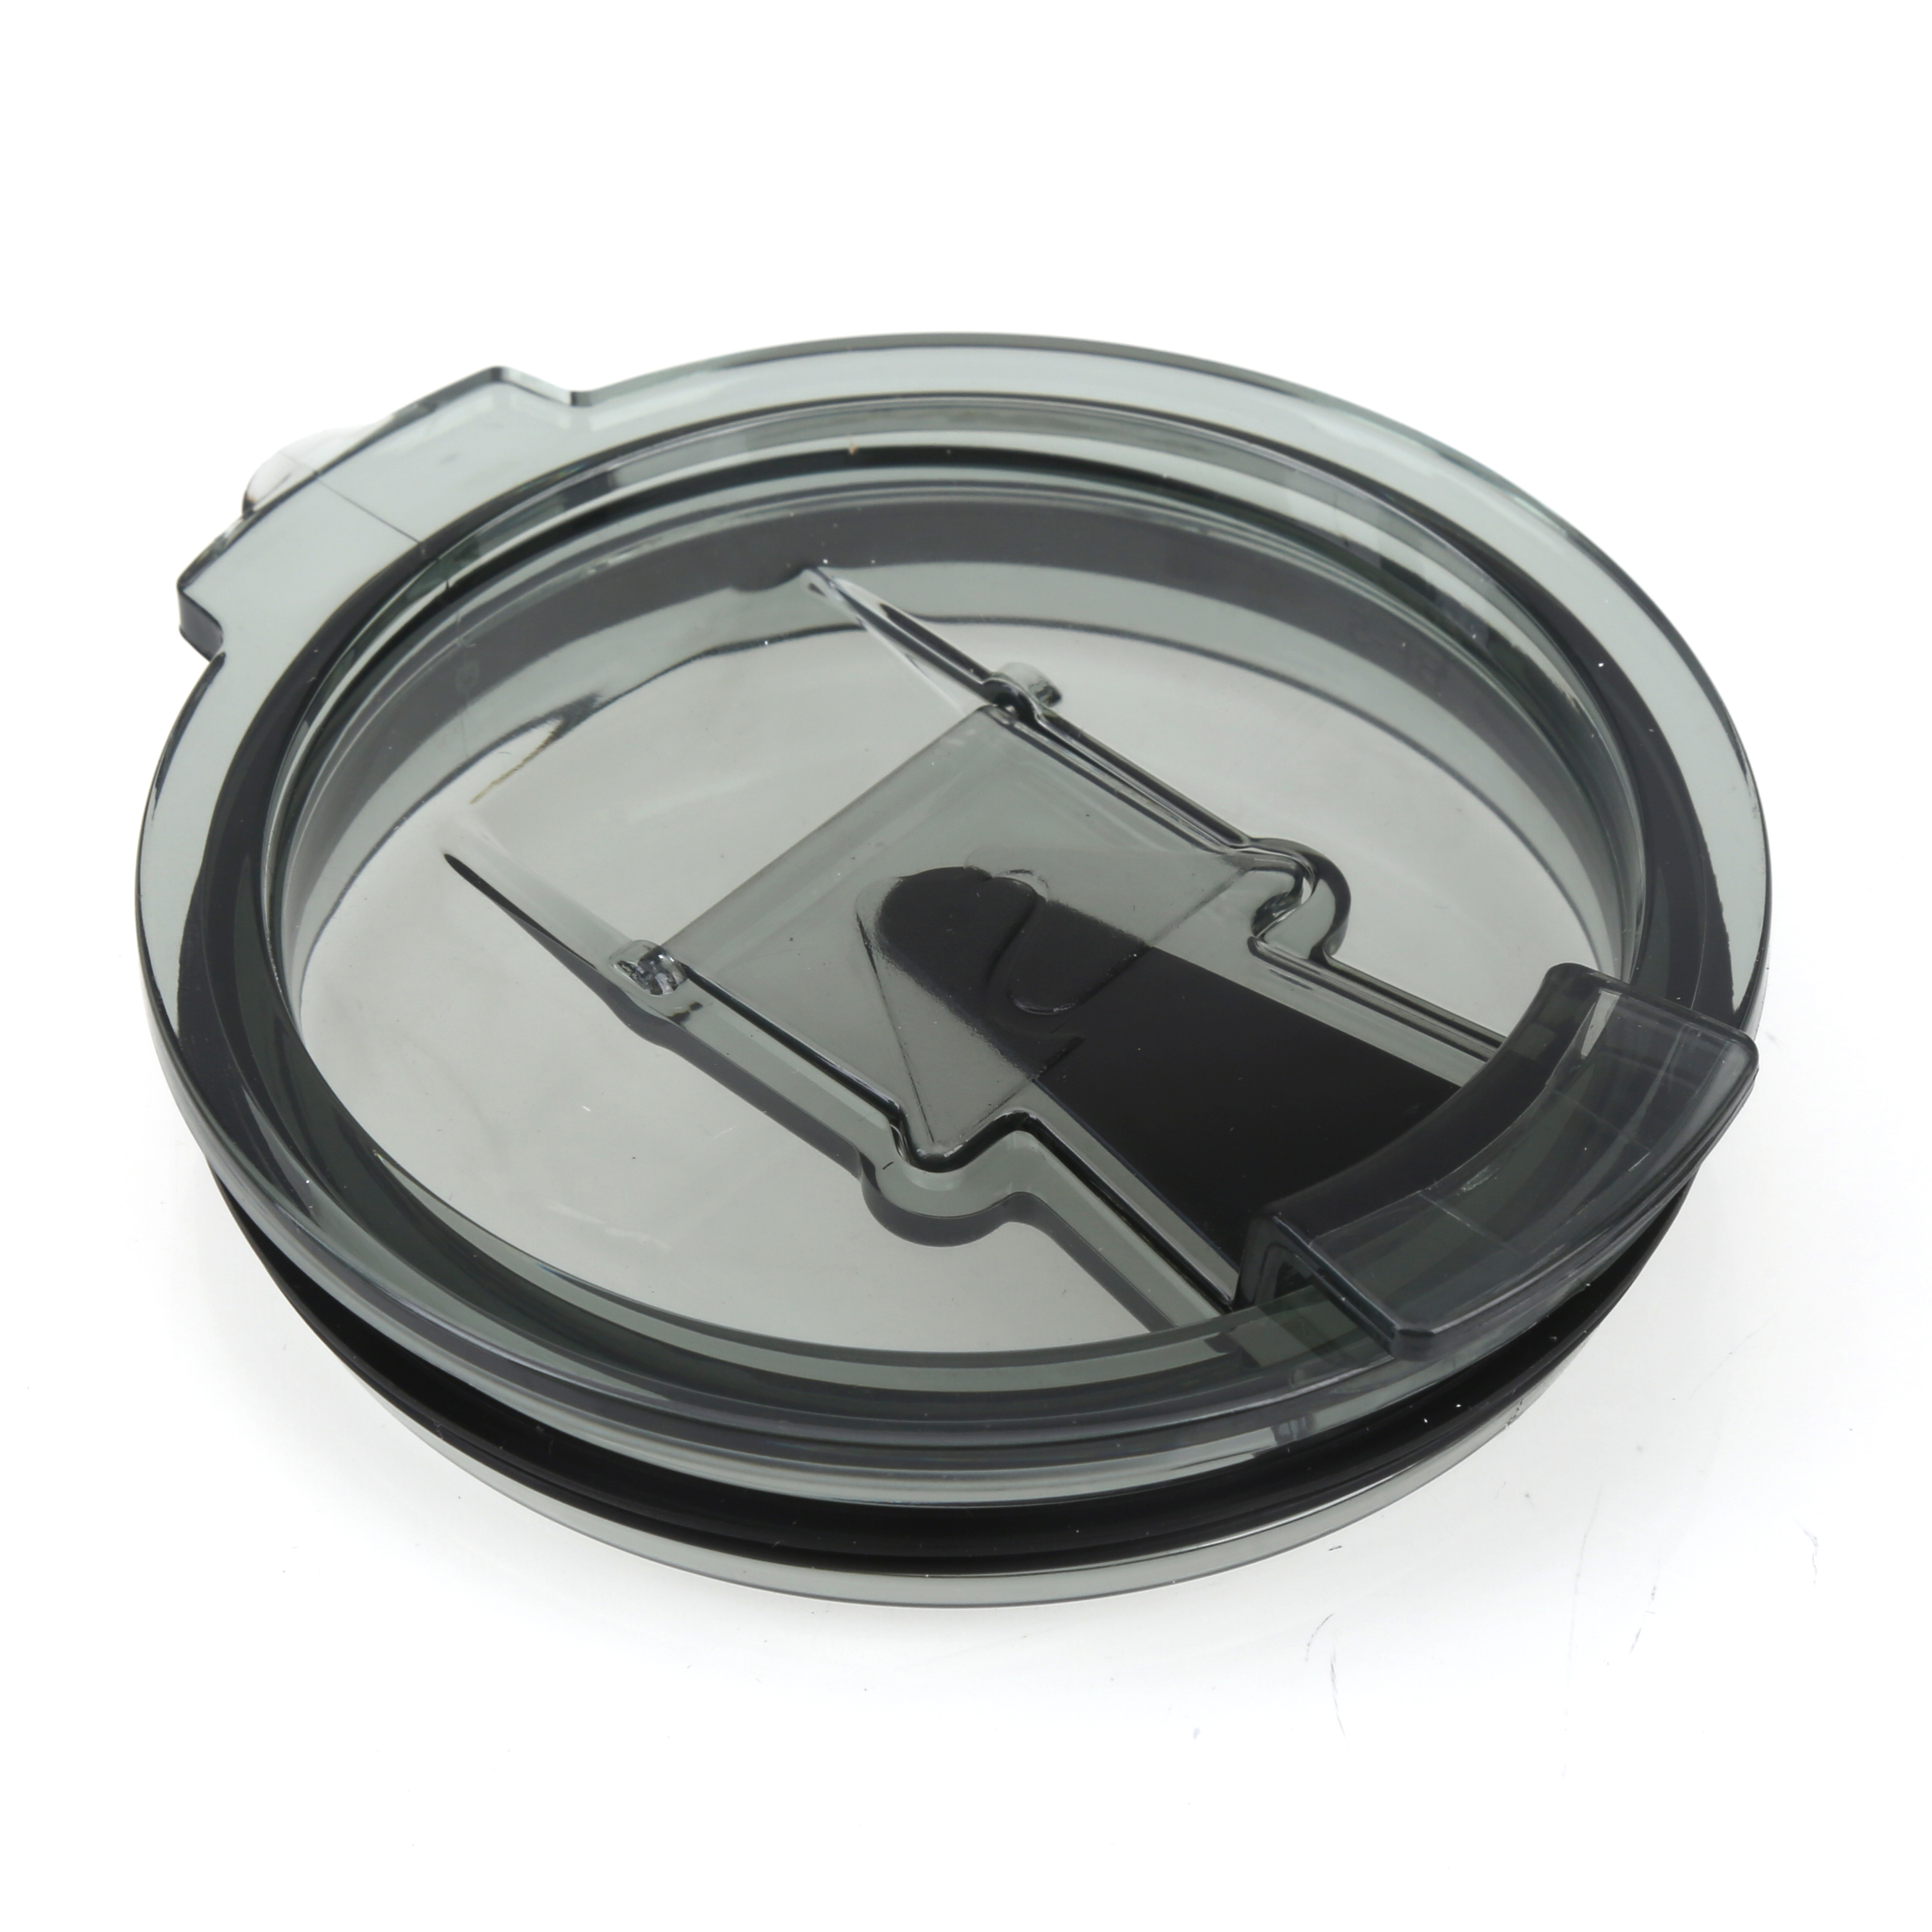 Ozark Trail 20 Oz. Leakproof Replacement Lid - image 4 of 7